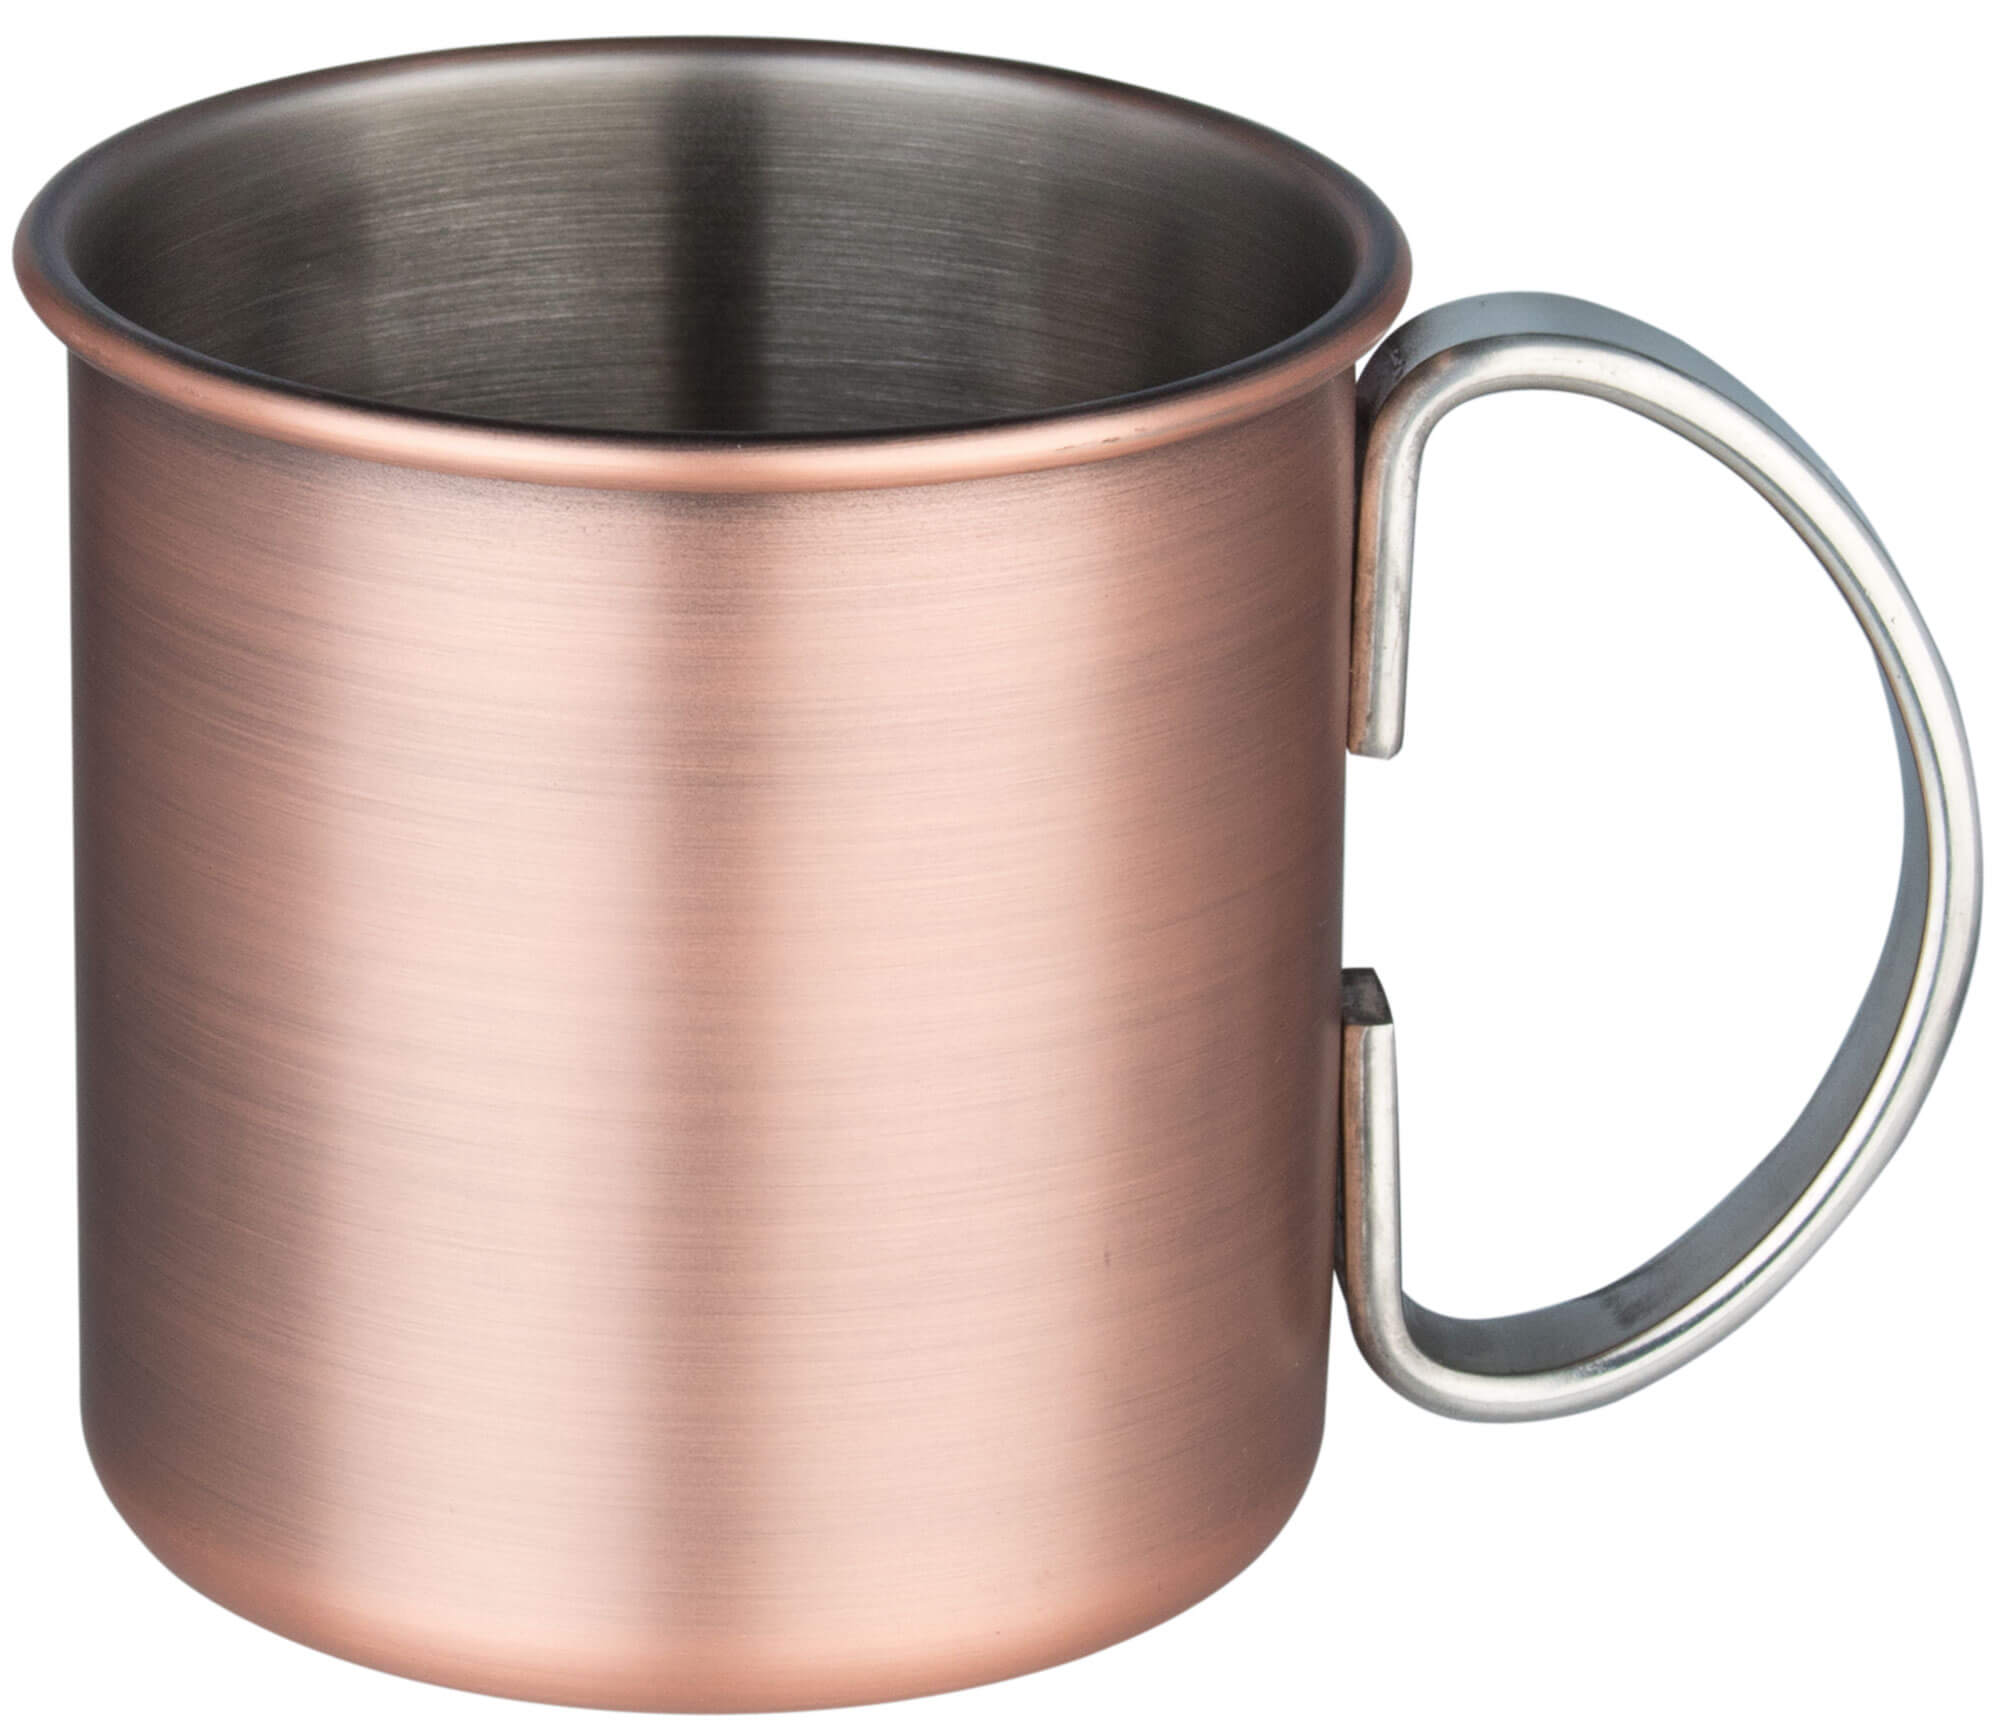 Moscow mule mug, antique copper look - 450ml